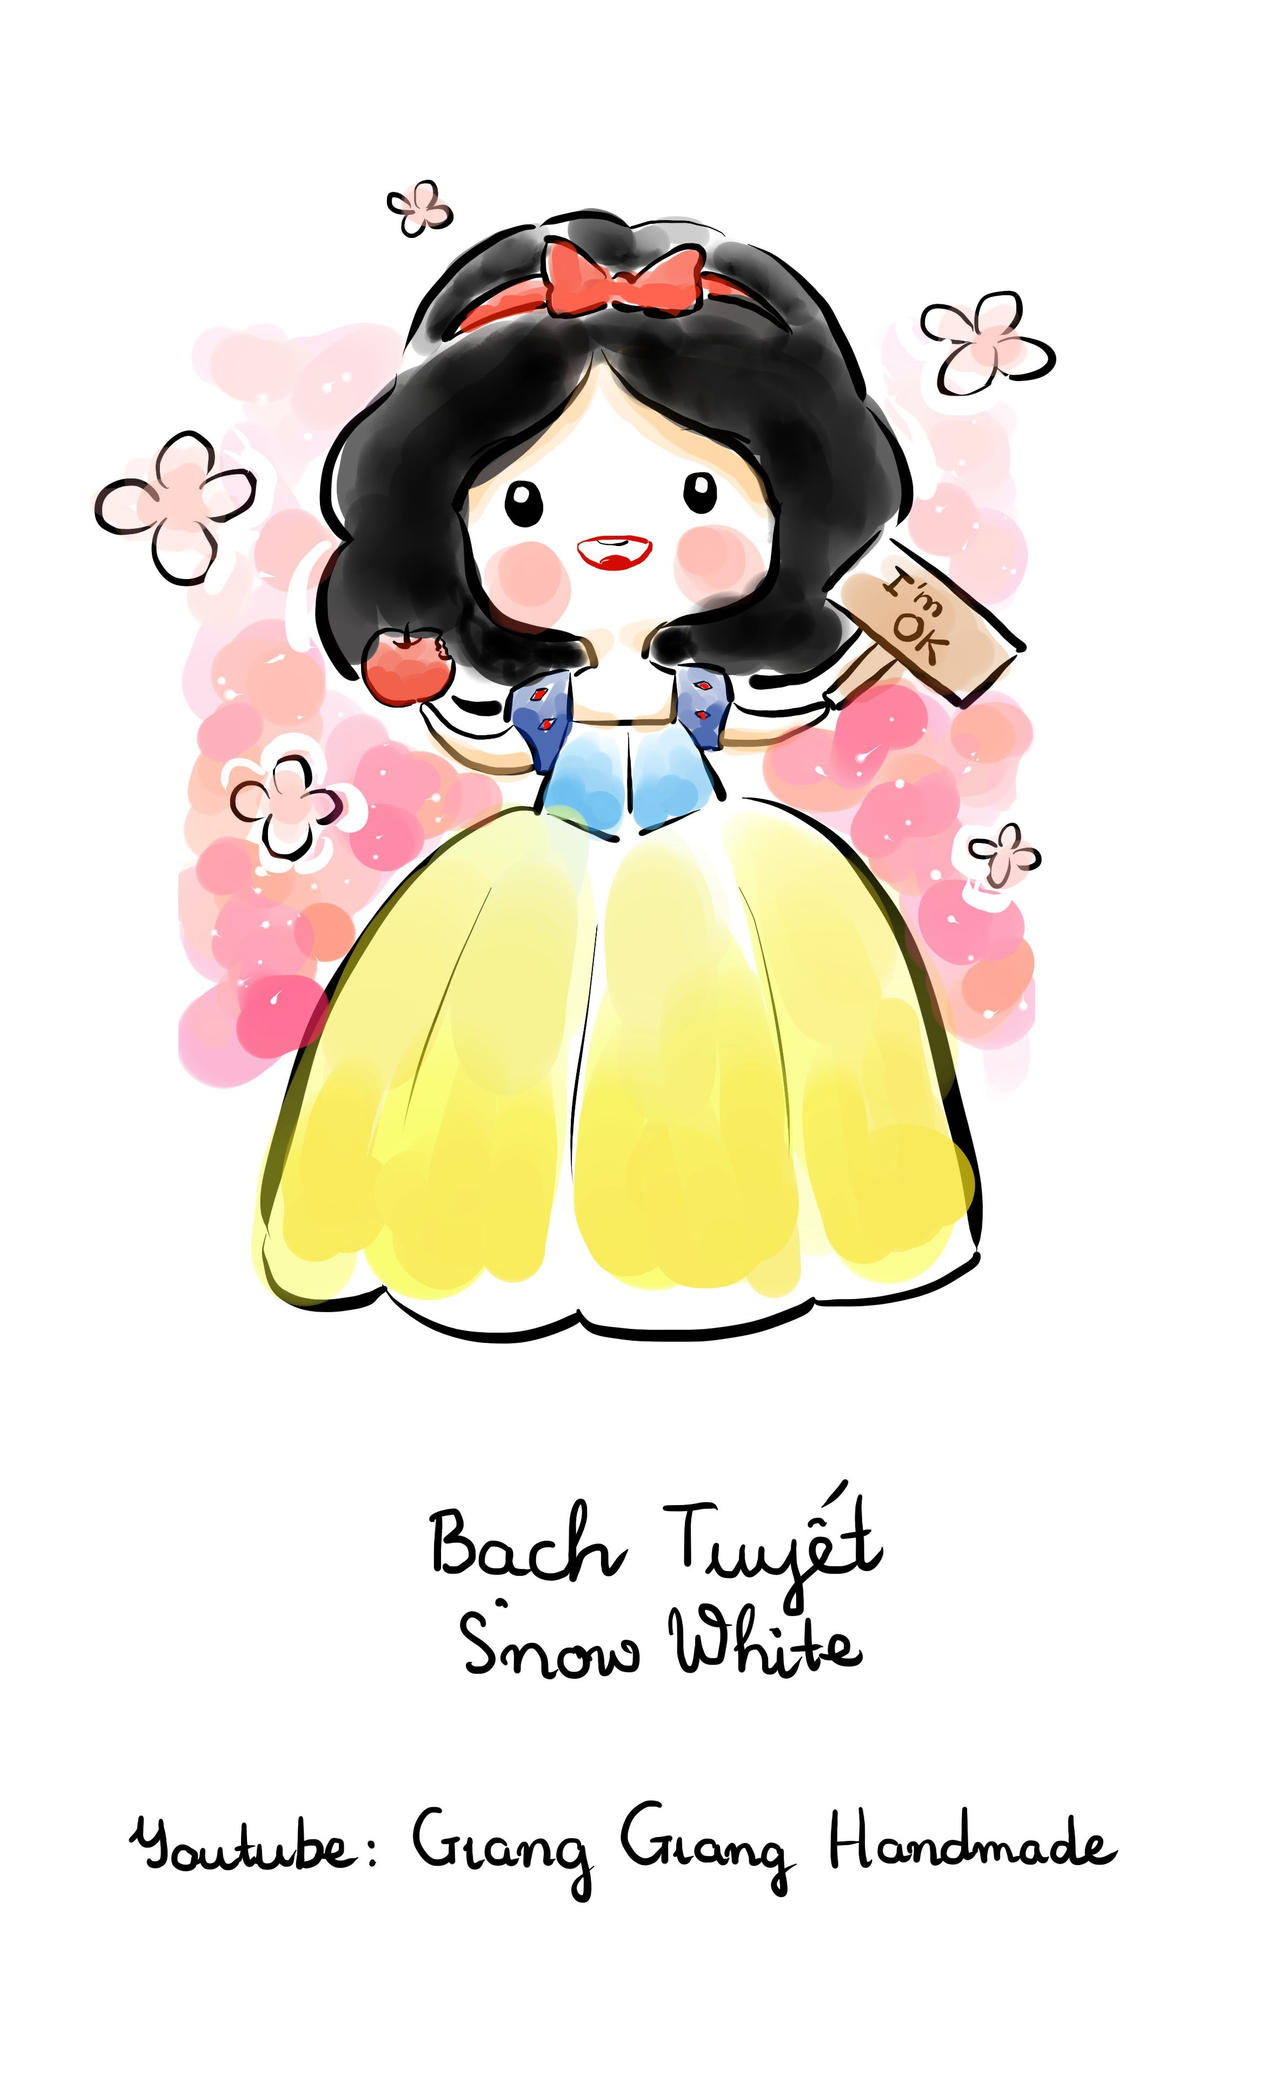 How To Draw Snow White Chibi Chibi Tutorial By Gianggianghandmade On Deviantart